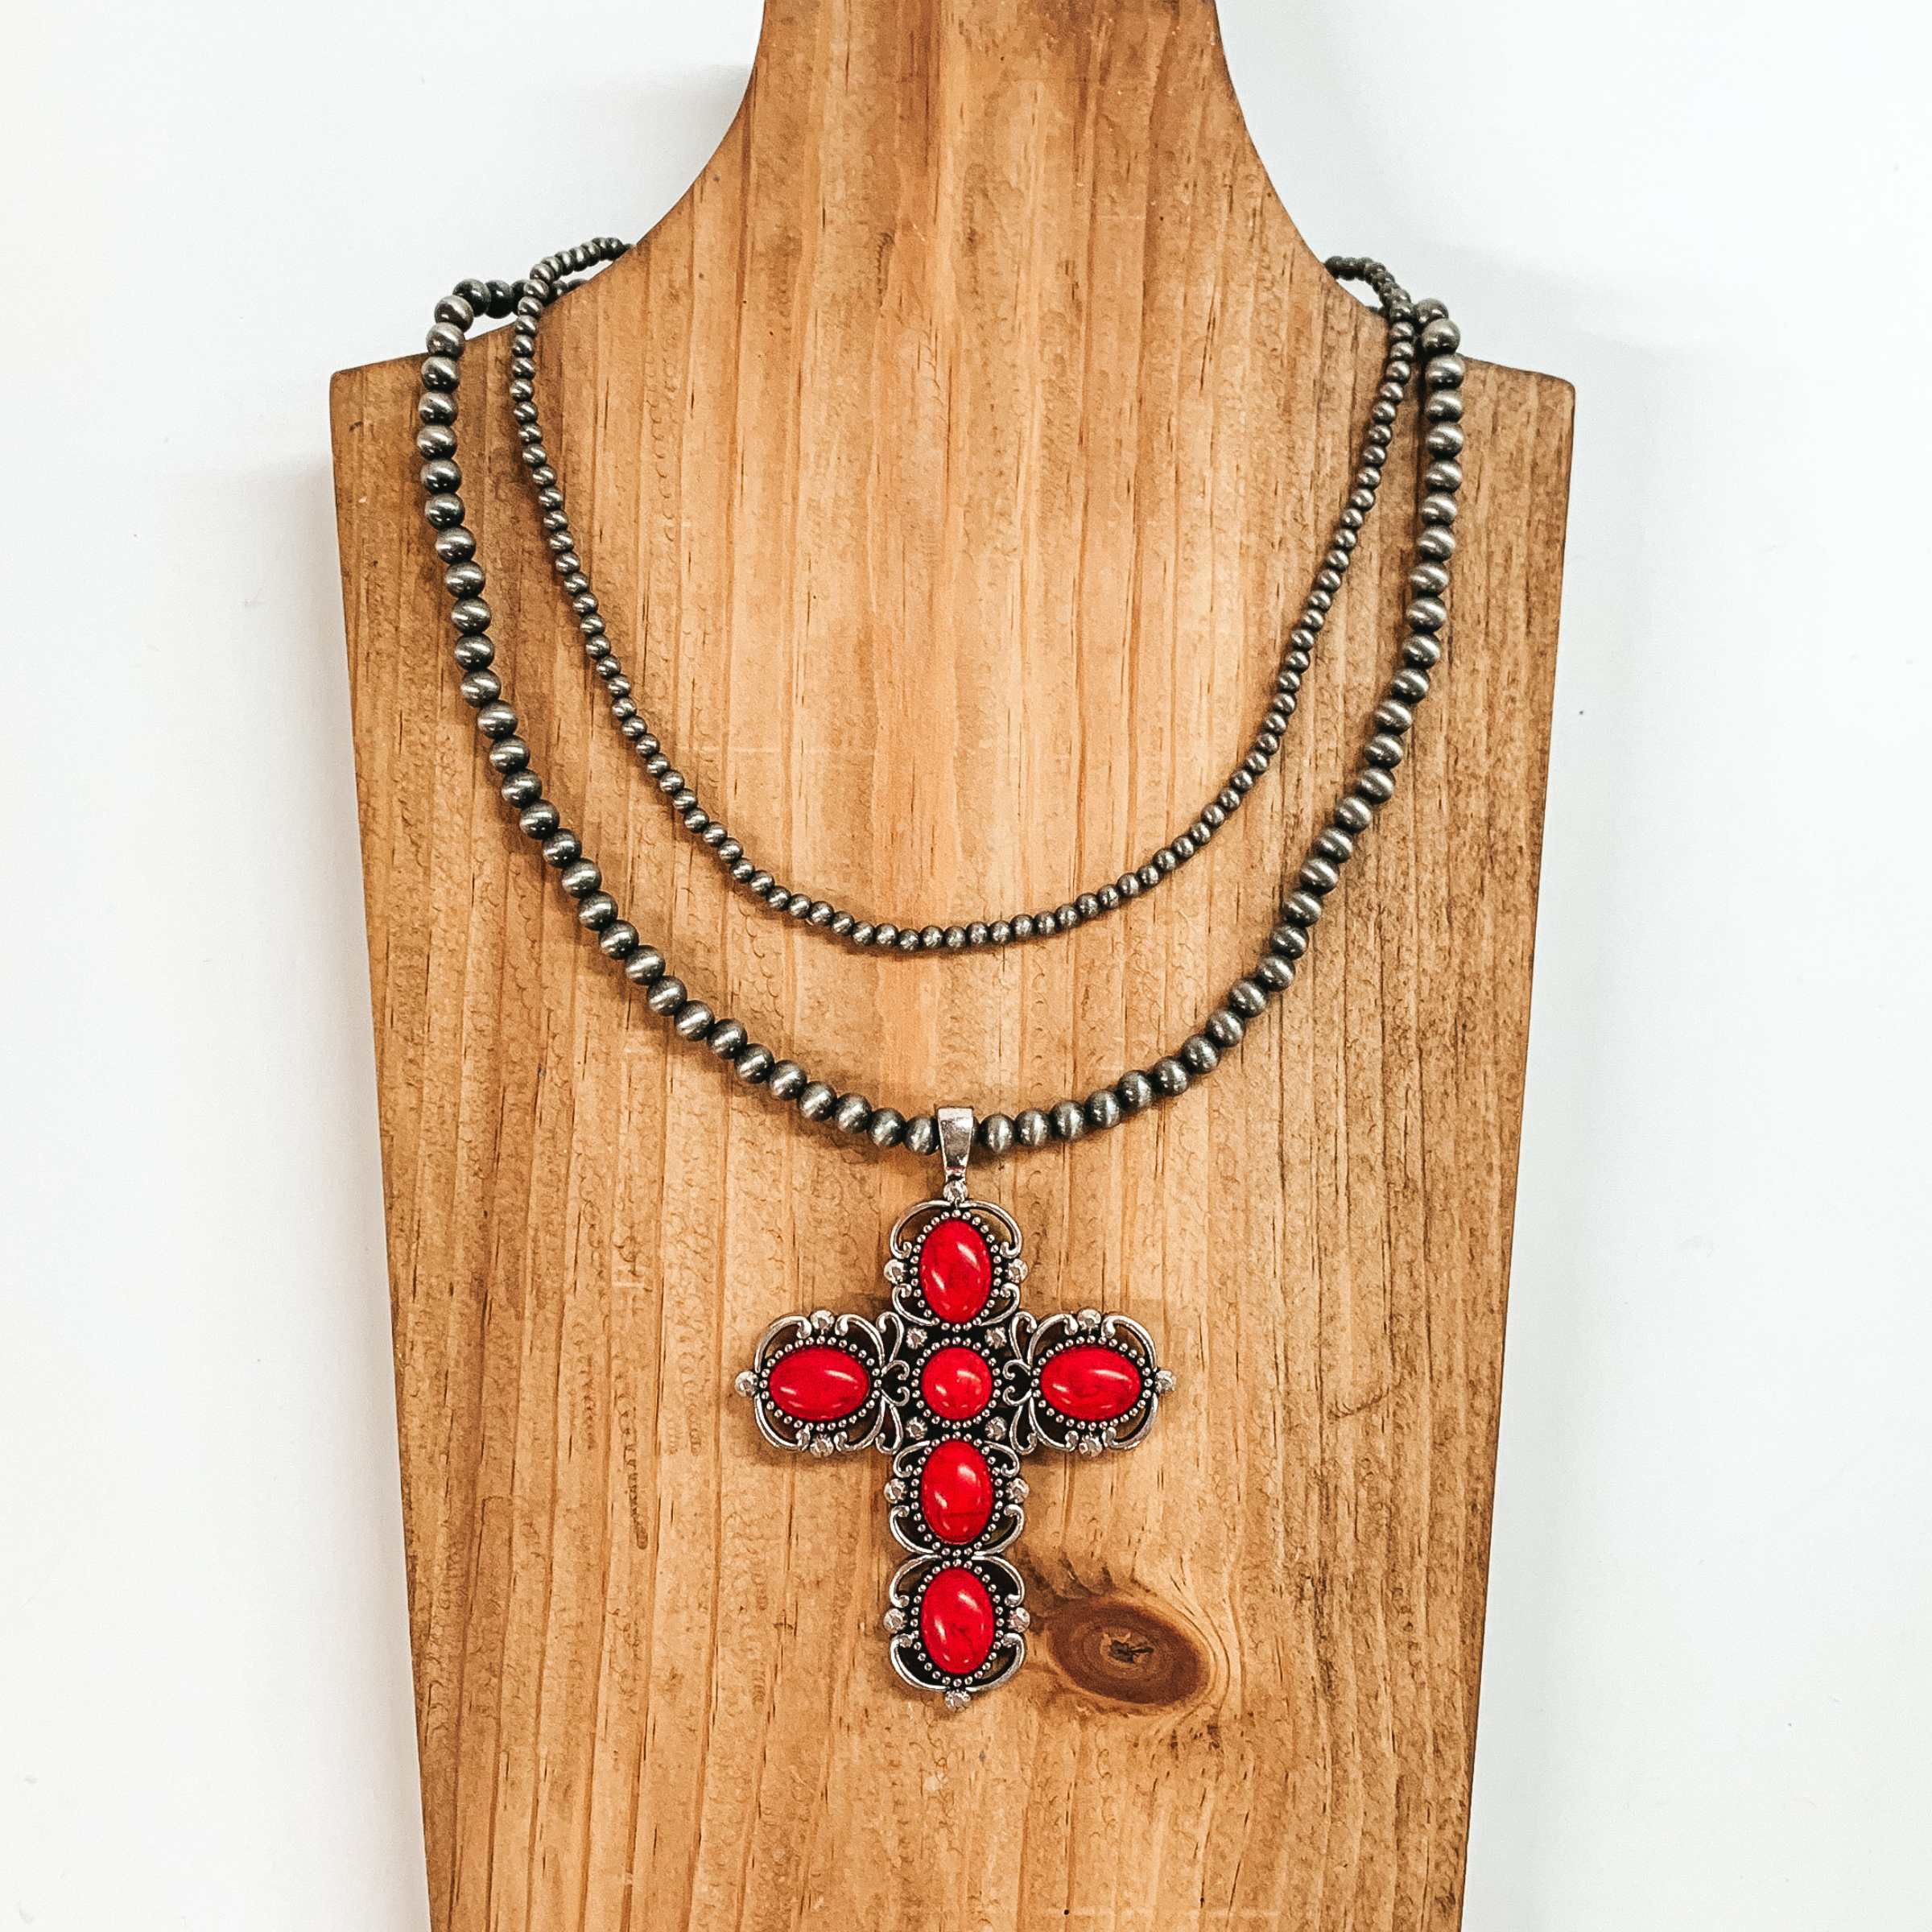 Two strand neckace with different sized silver beaded strands of different lengths with a cross pendant that has red stones. This necklace is pictured on a wooden necklace holder on a white background. 